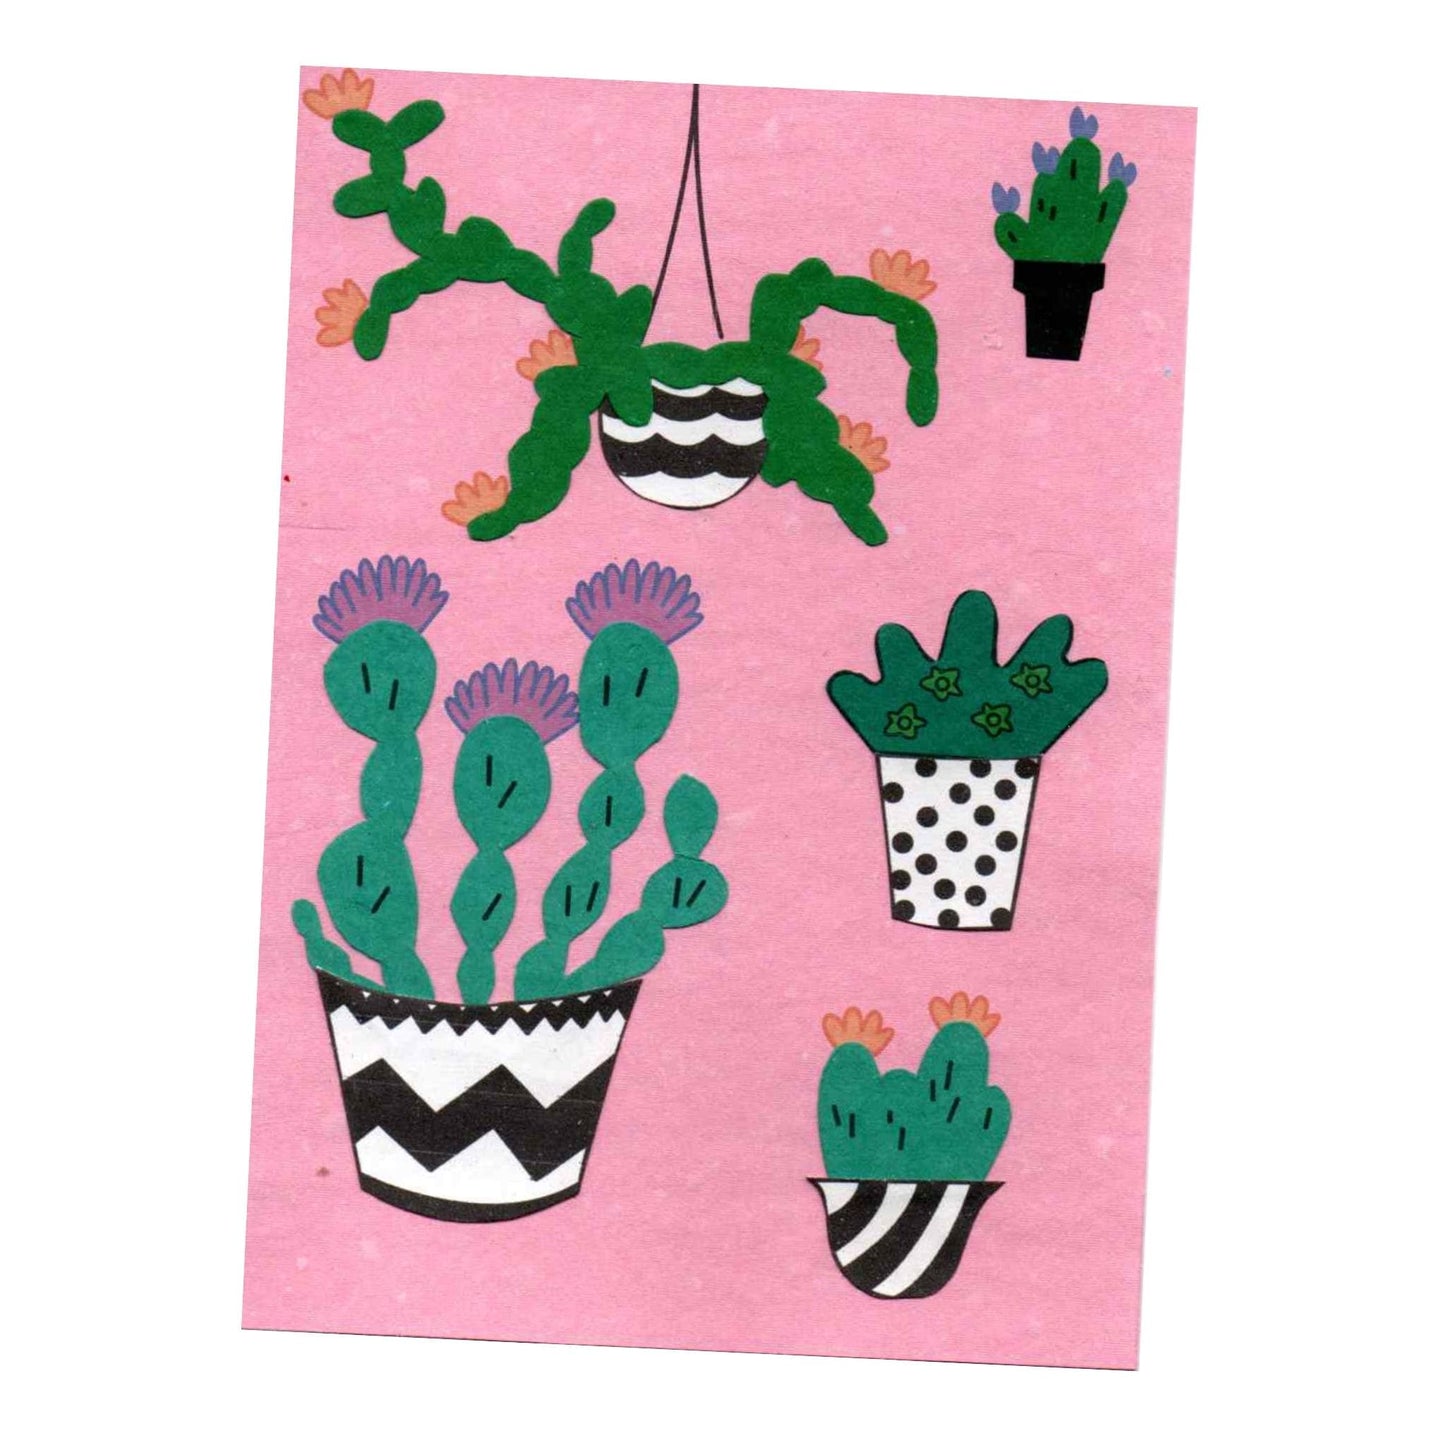 Cacti Handmade and Recycled Card